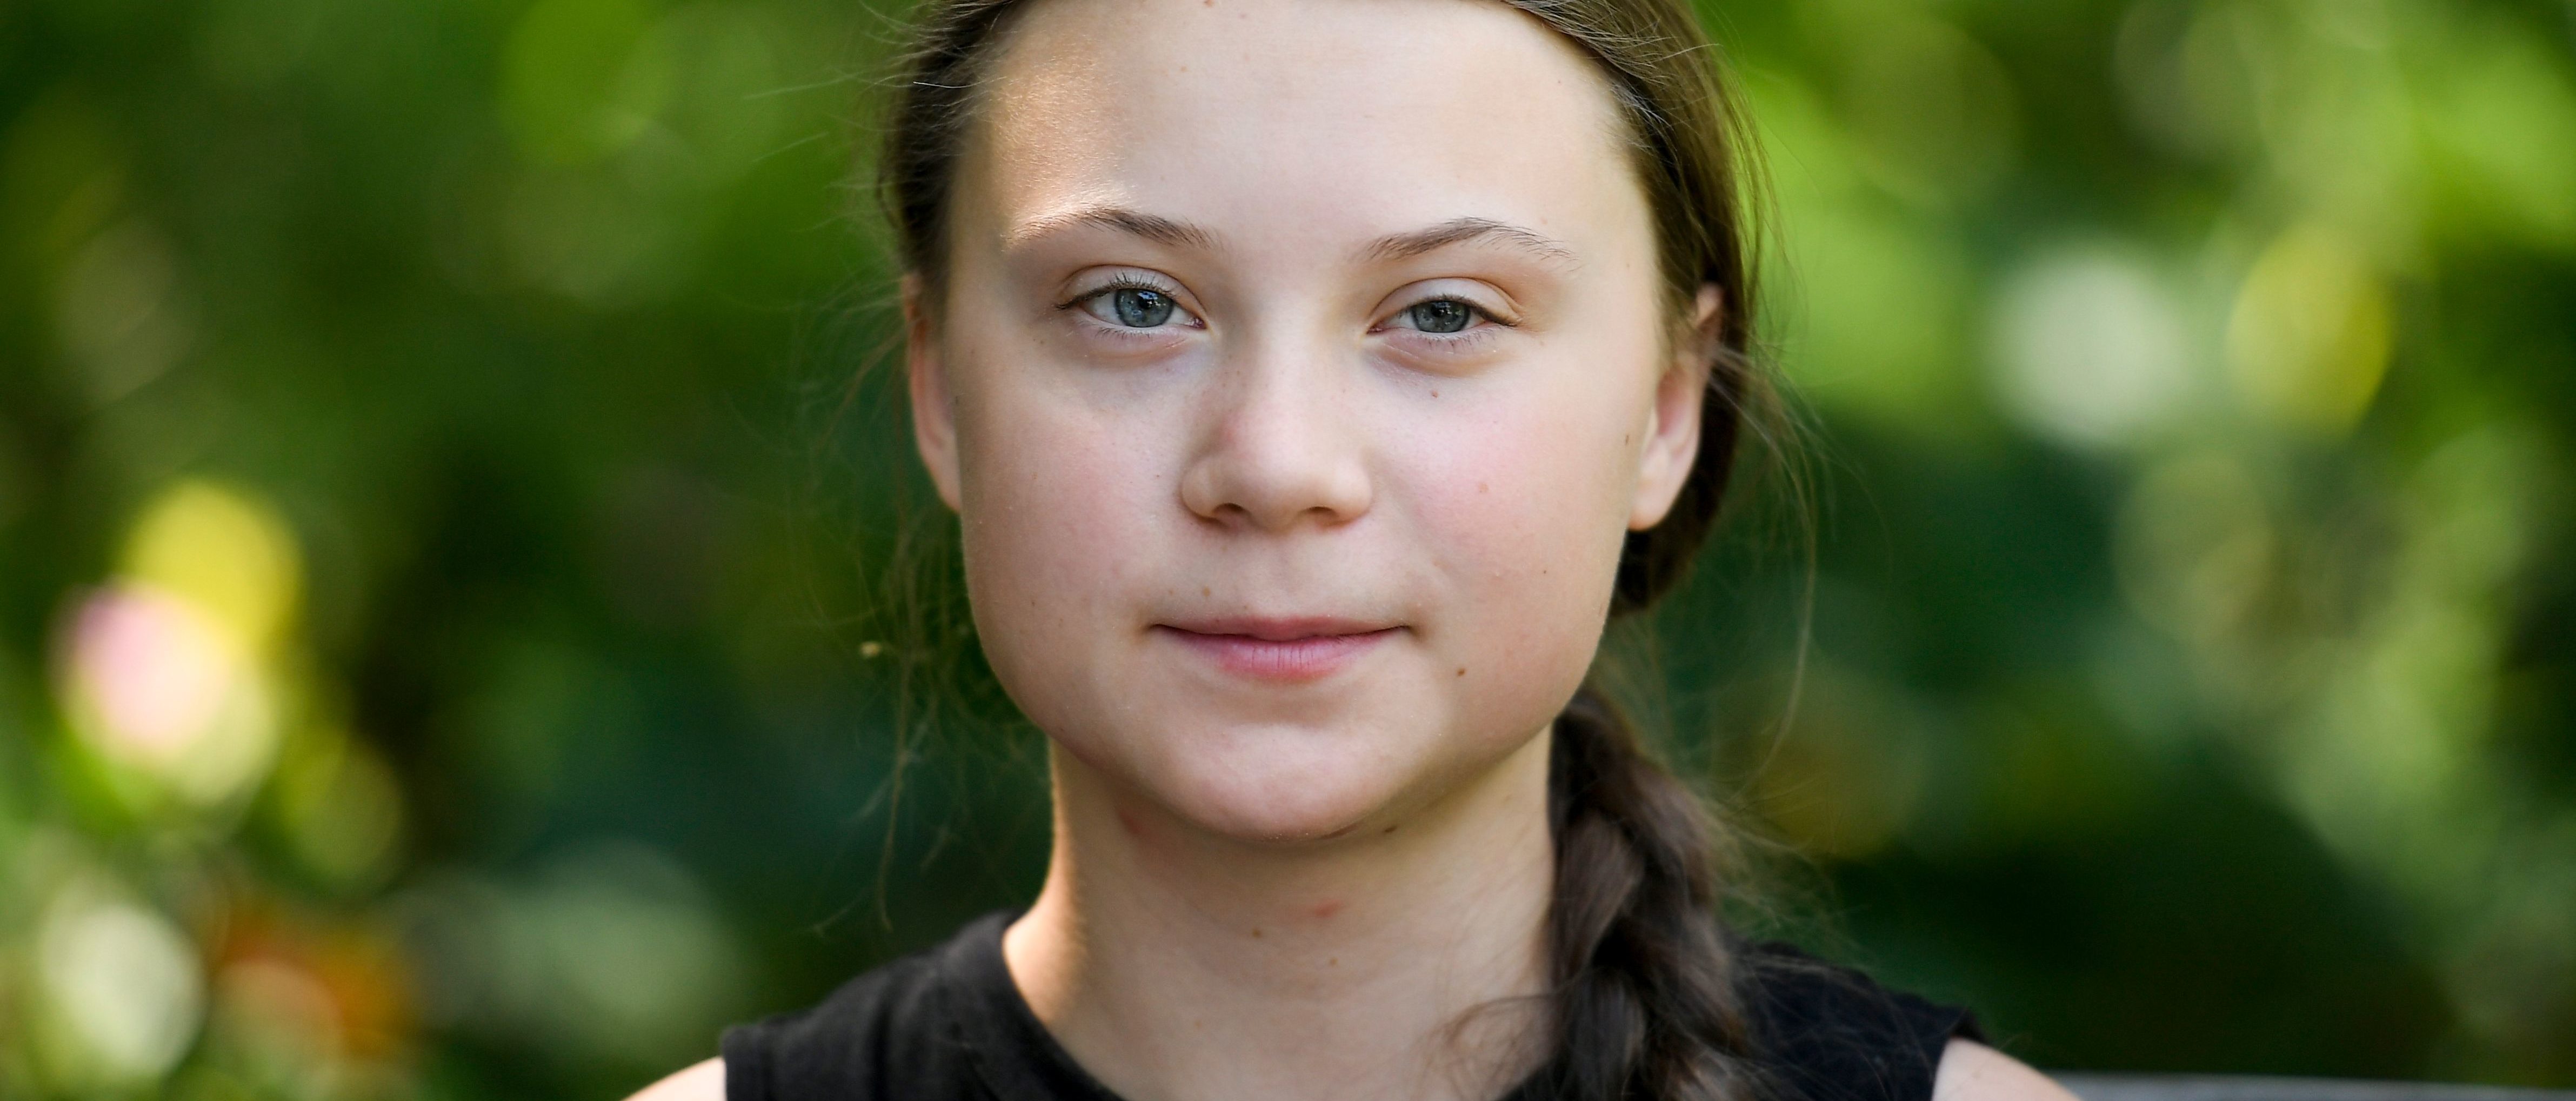 newly-painted-greta-thunberg-mural-defaced-stop-the-lies-this-is-oil